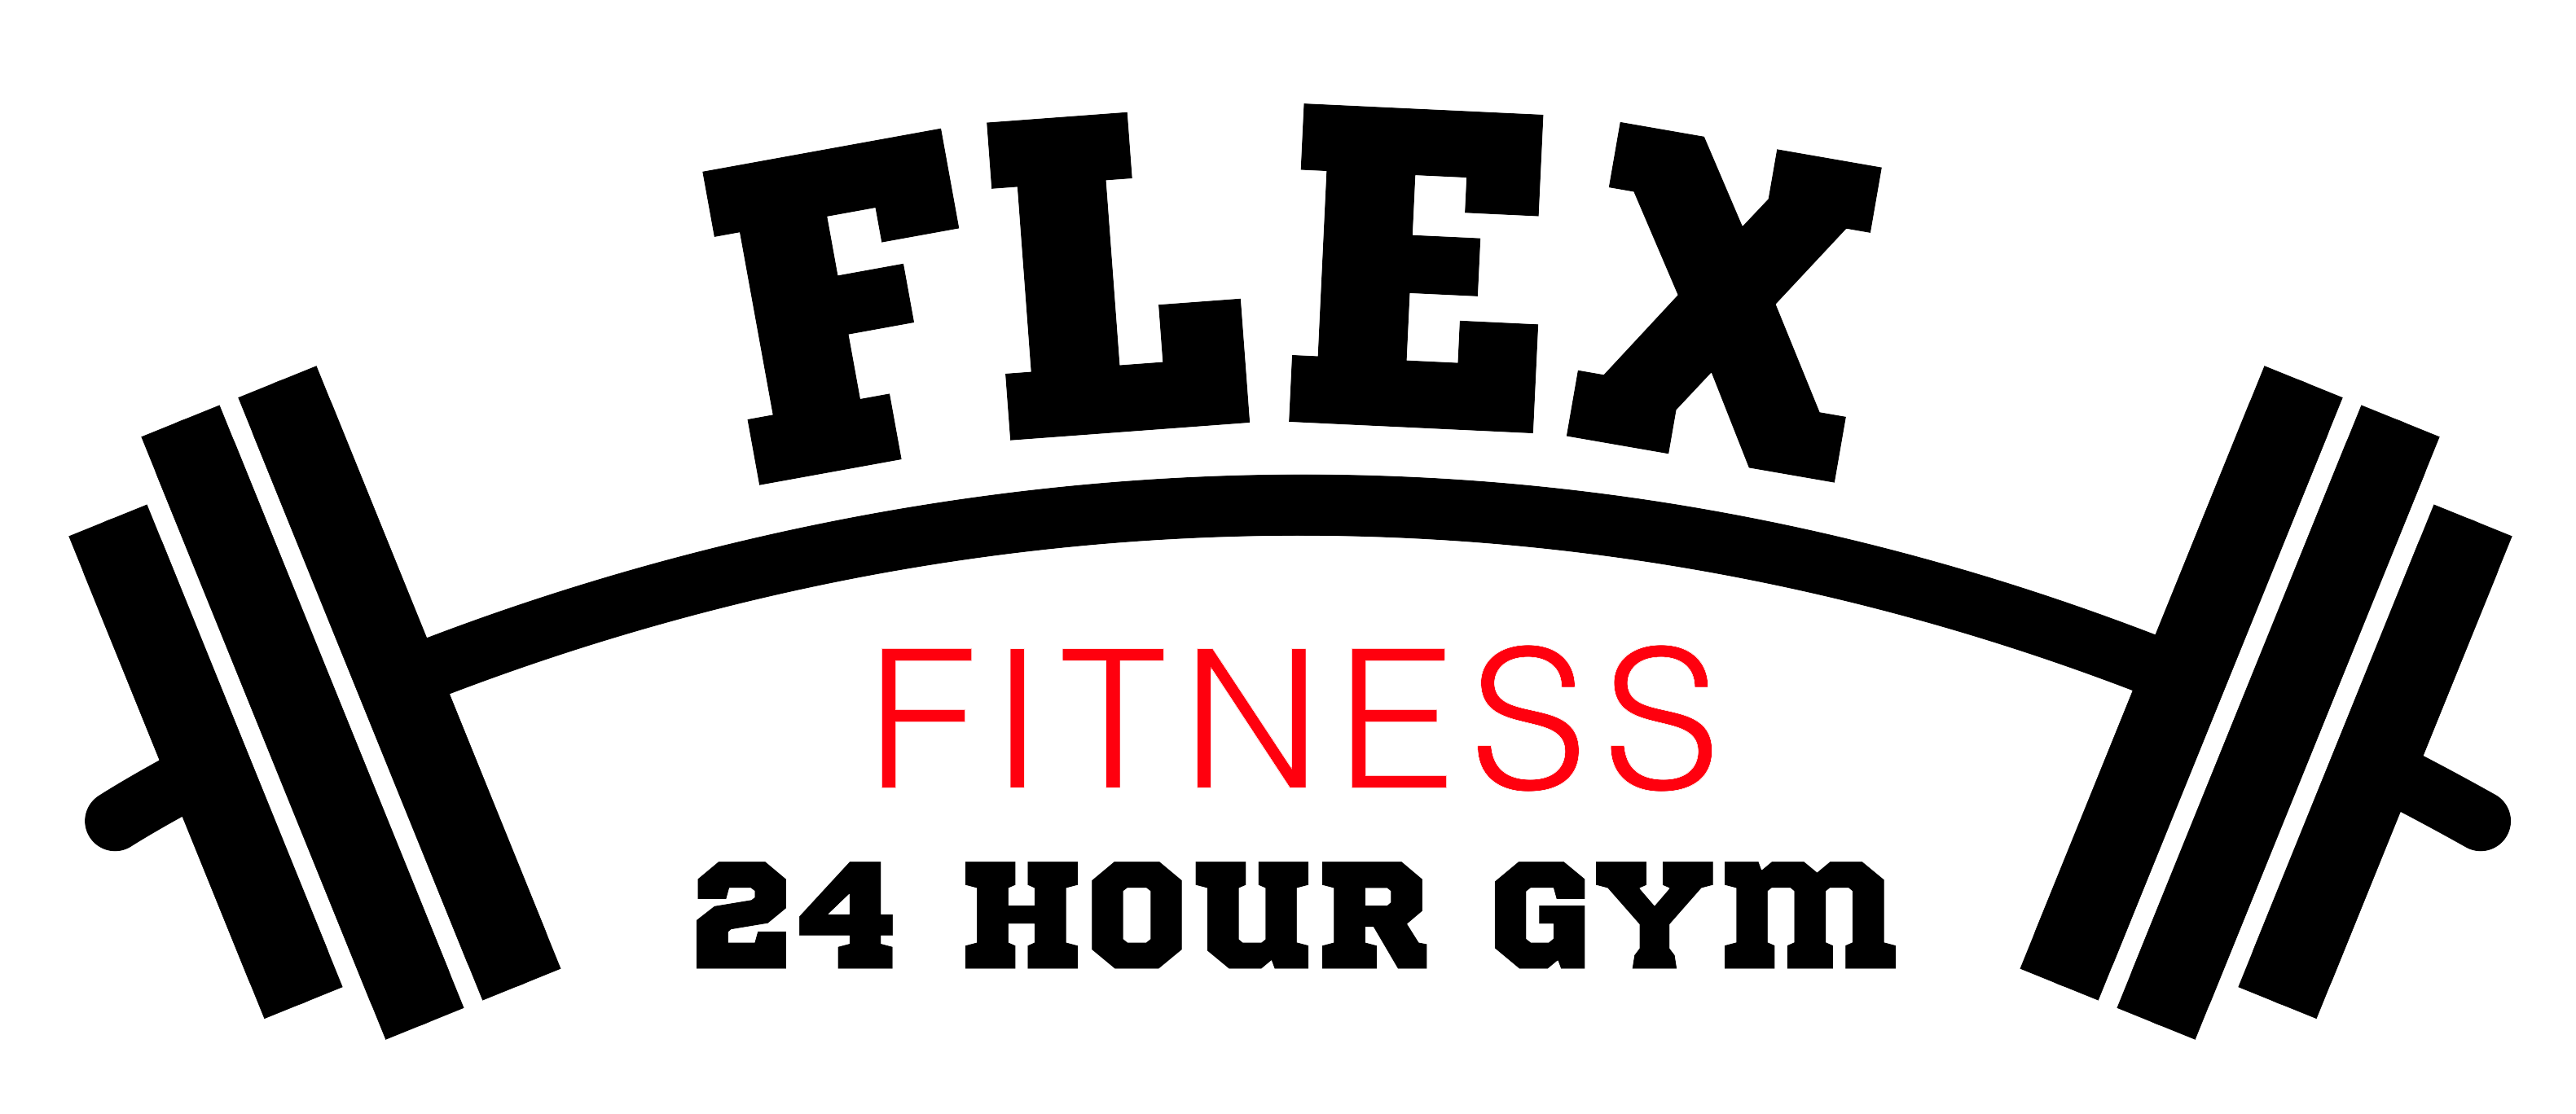 Flex Fitness Hastings 24 Hour Gym: Opening Hours, Price and Opinions